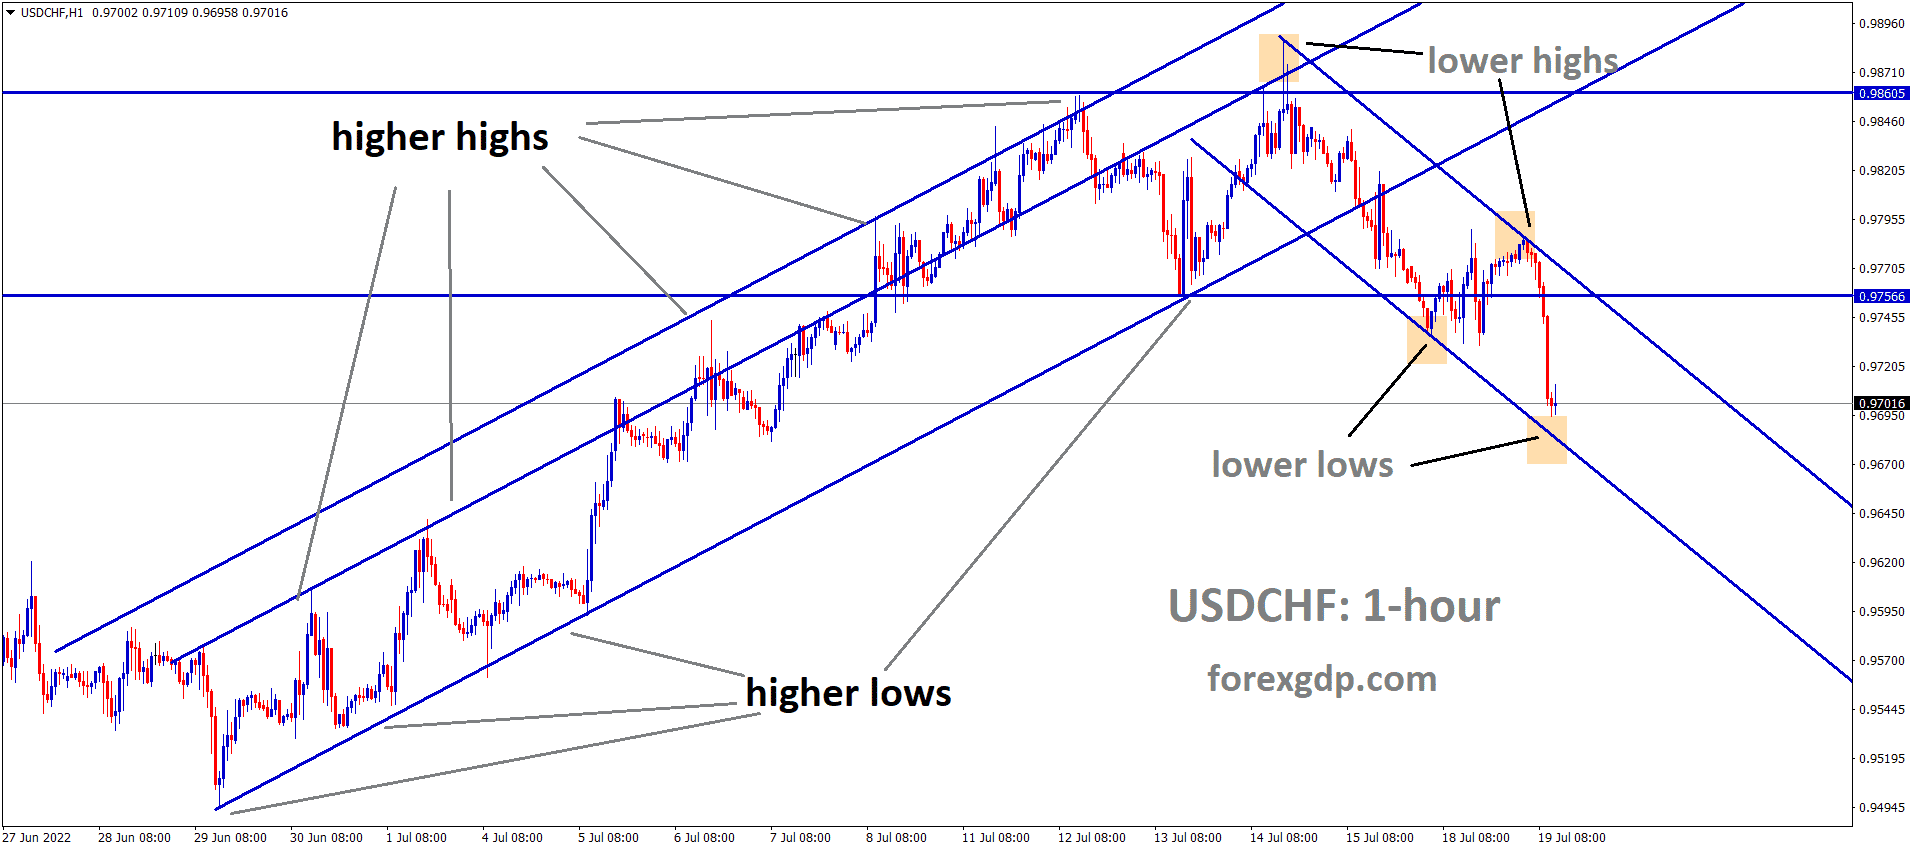 USDCHF has broken the Ascending channel and market has reached the Lower low area of the Descending channel.